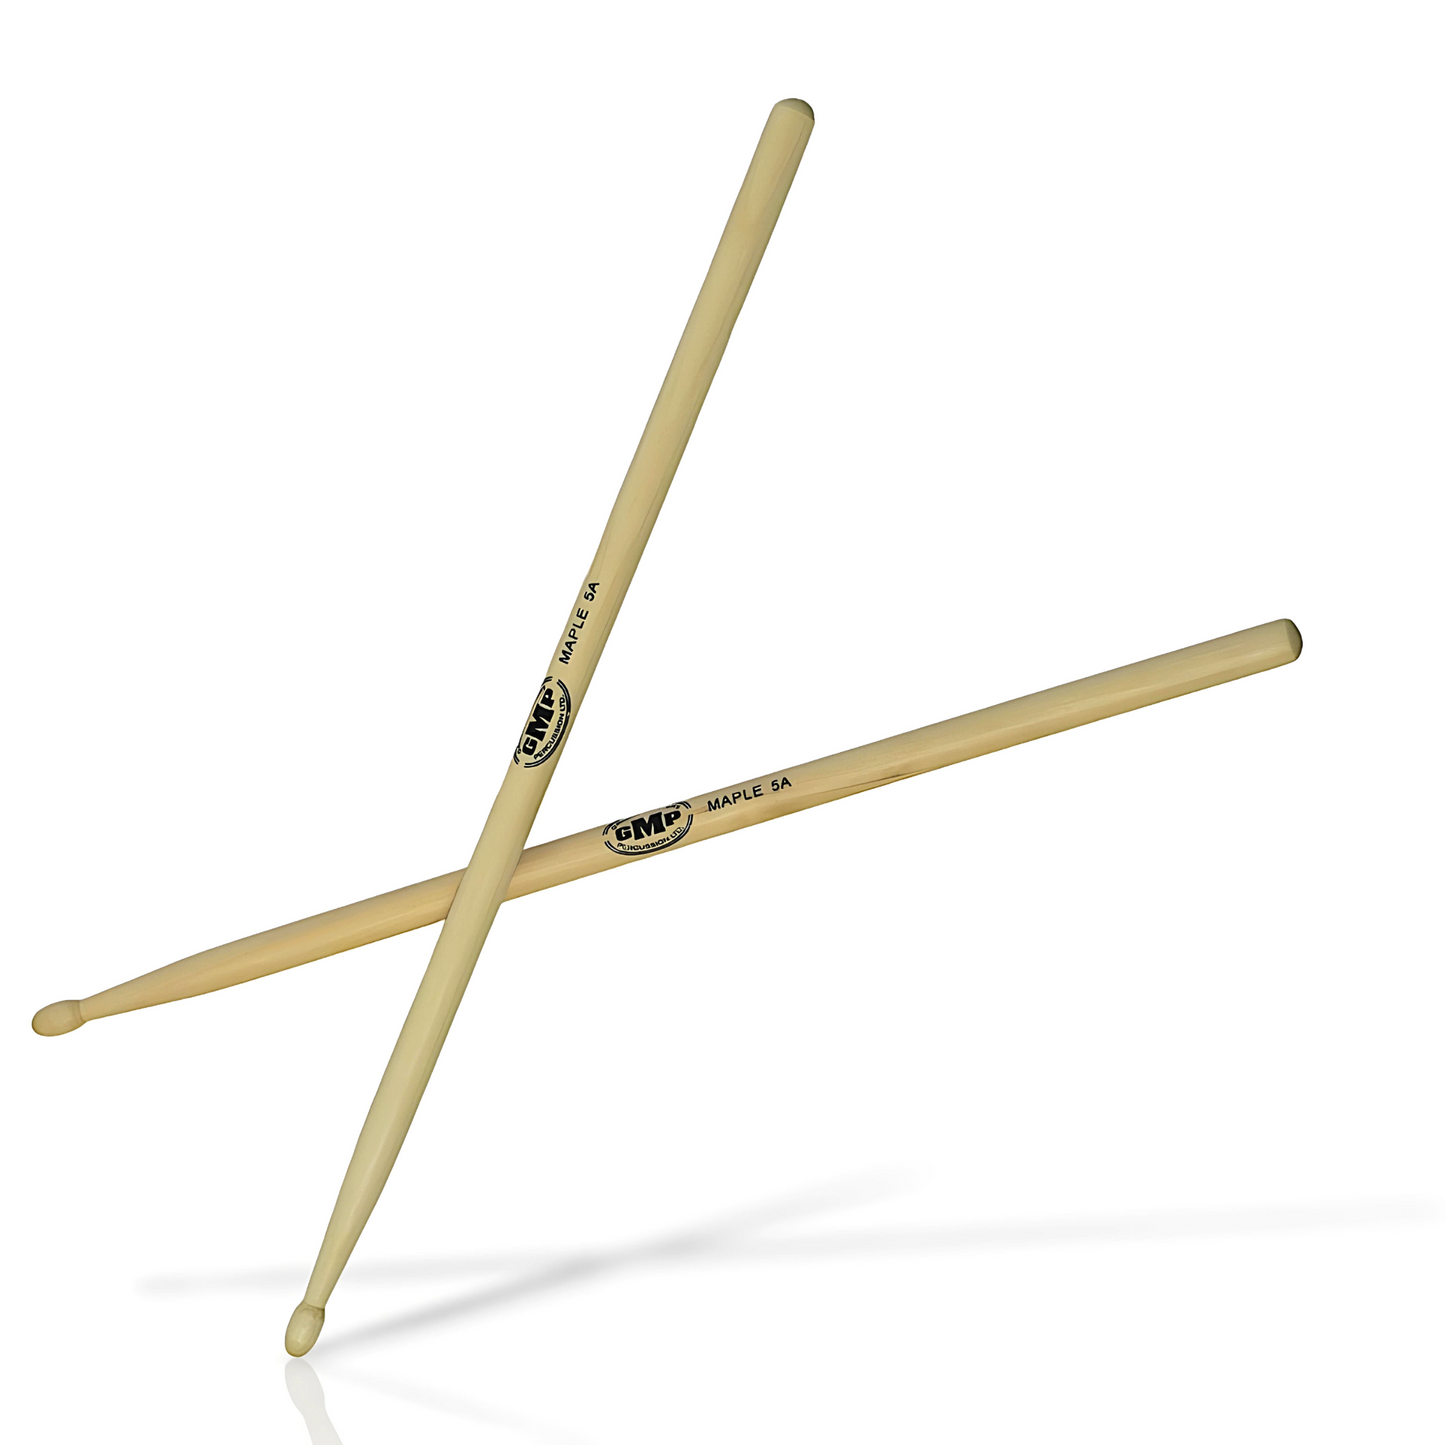 GMP 5A Maple Drumsticks, Pair and 12-Pair Packs (STK-M5A, STK-M5AW)